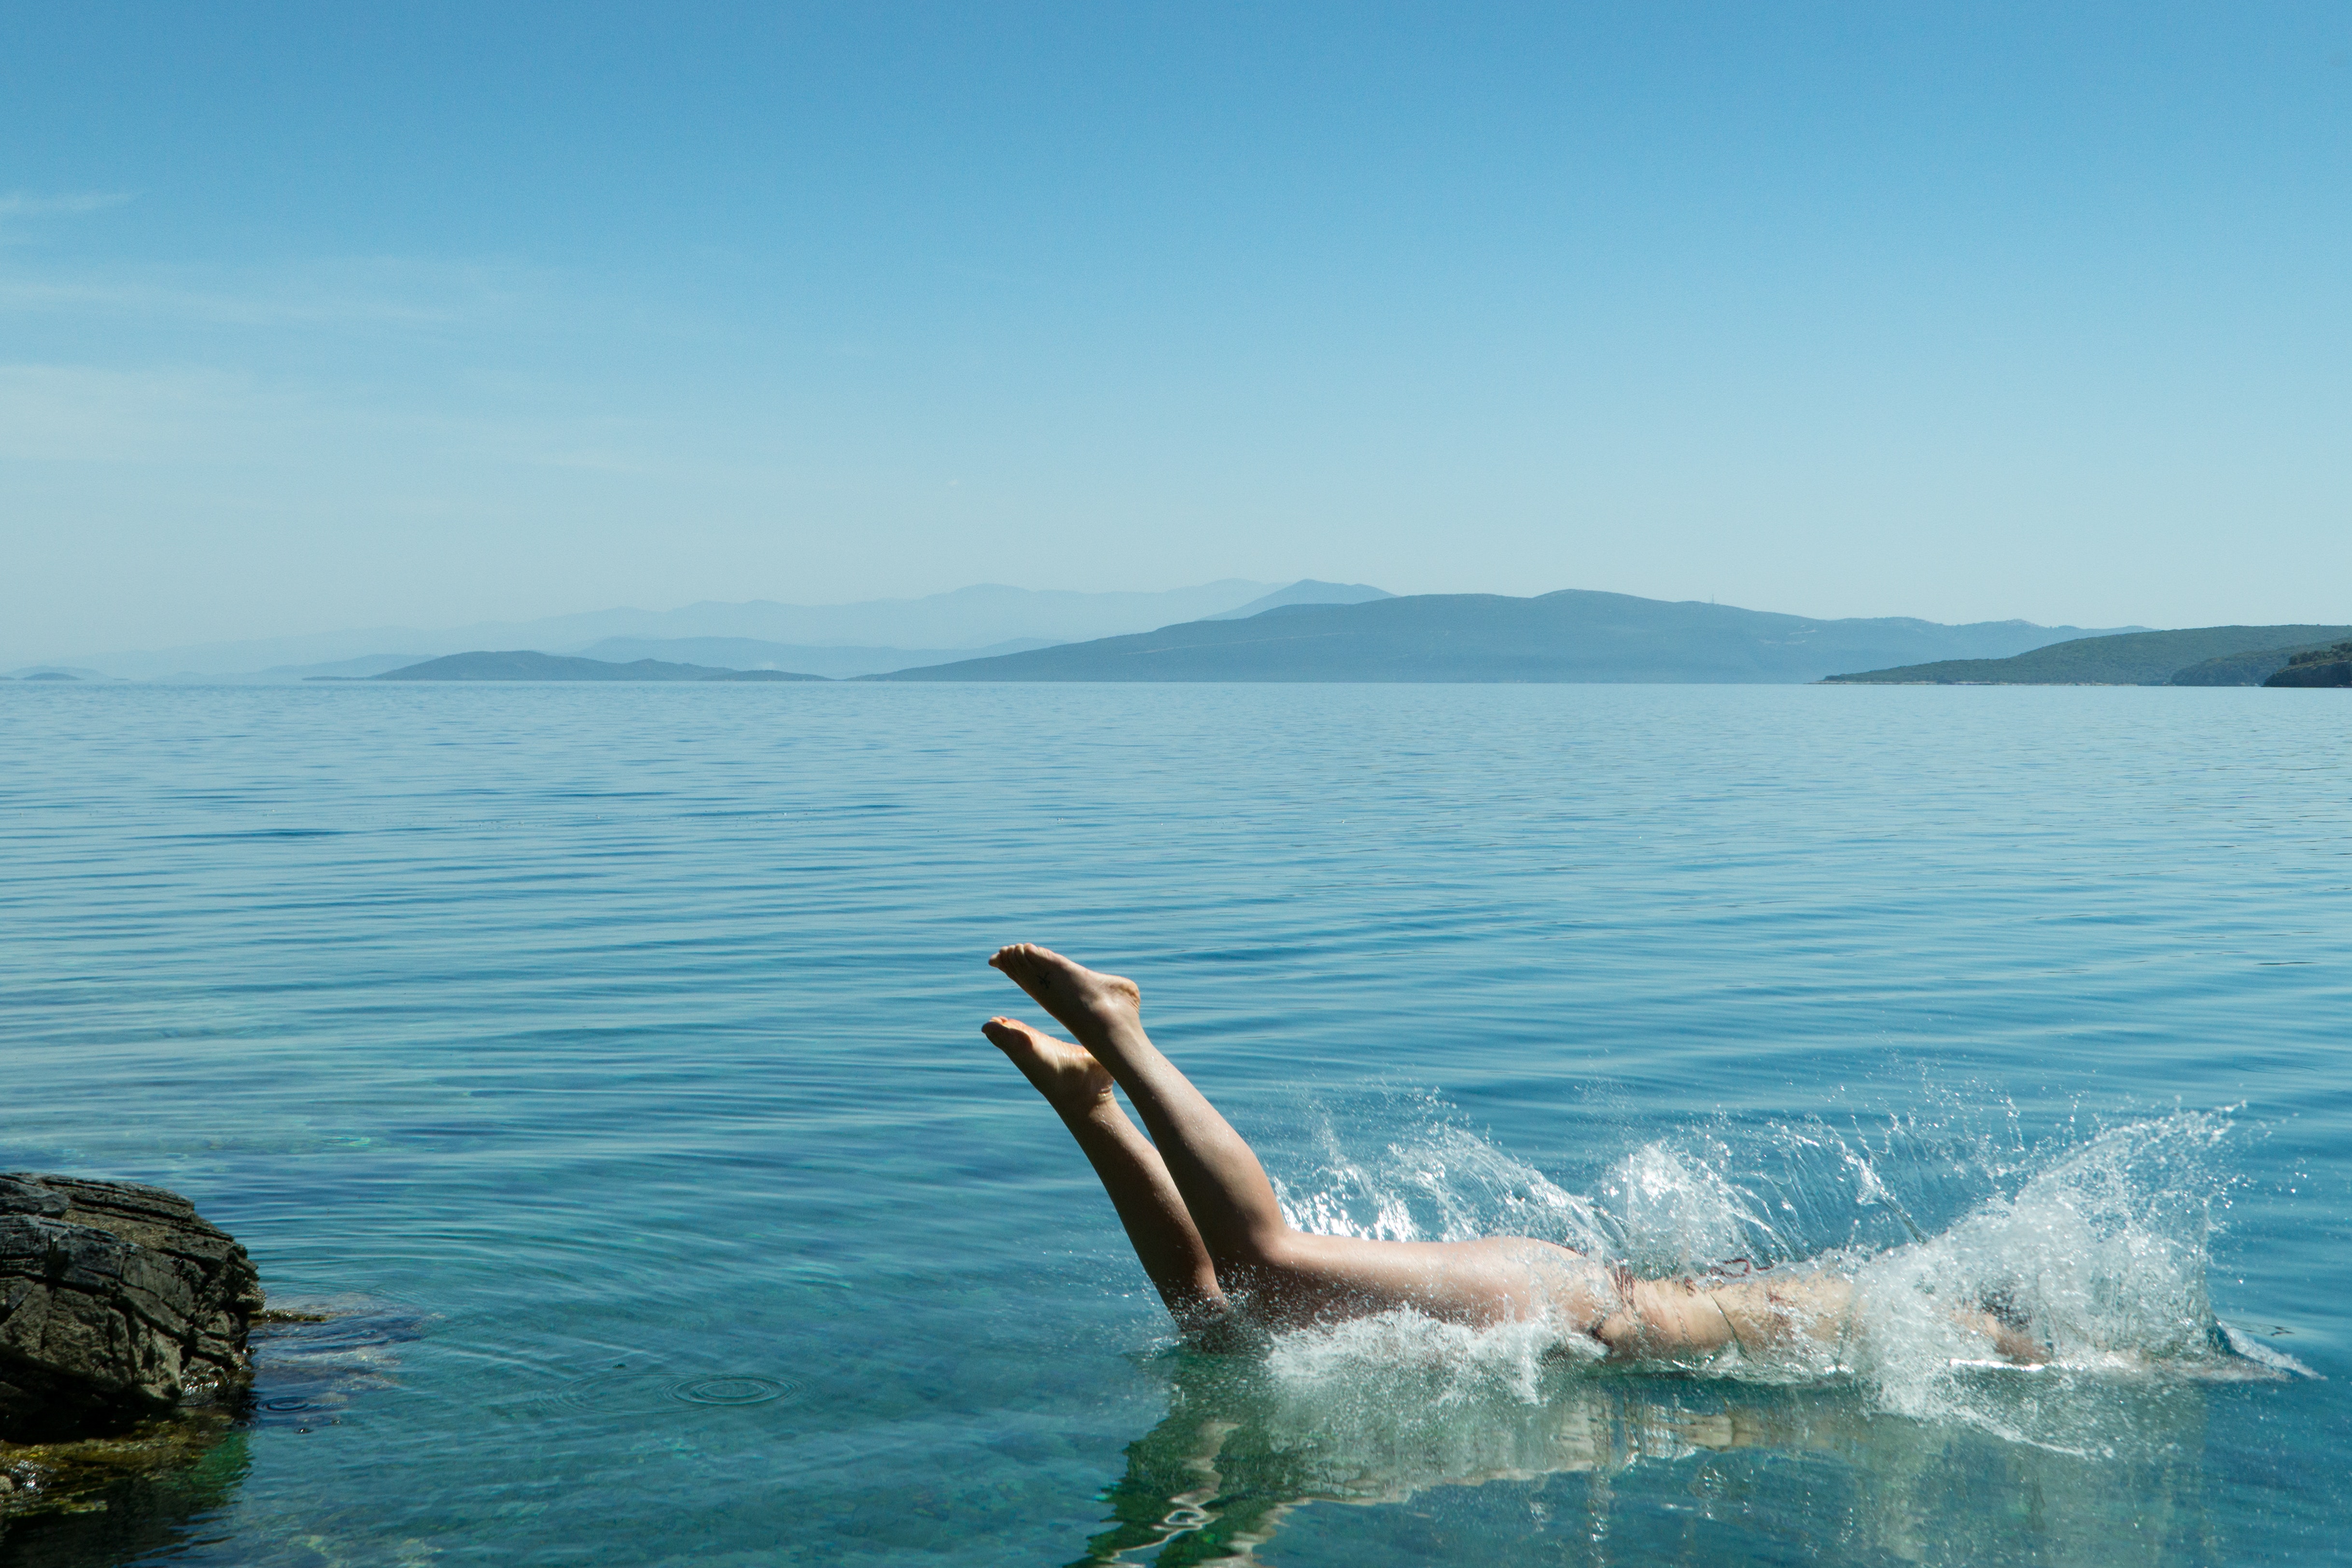 Person diving on body of water during daytime photo